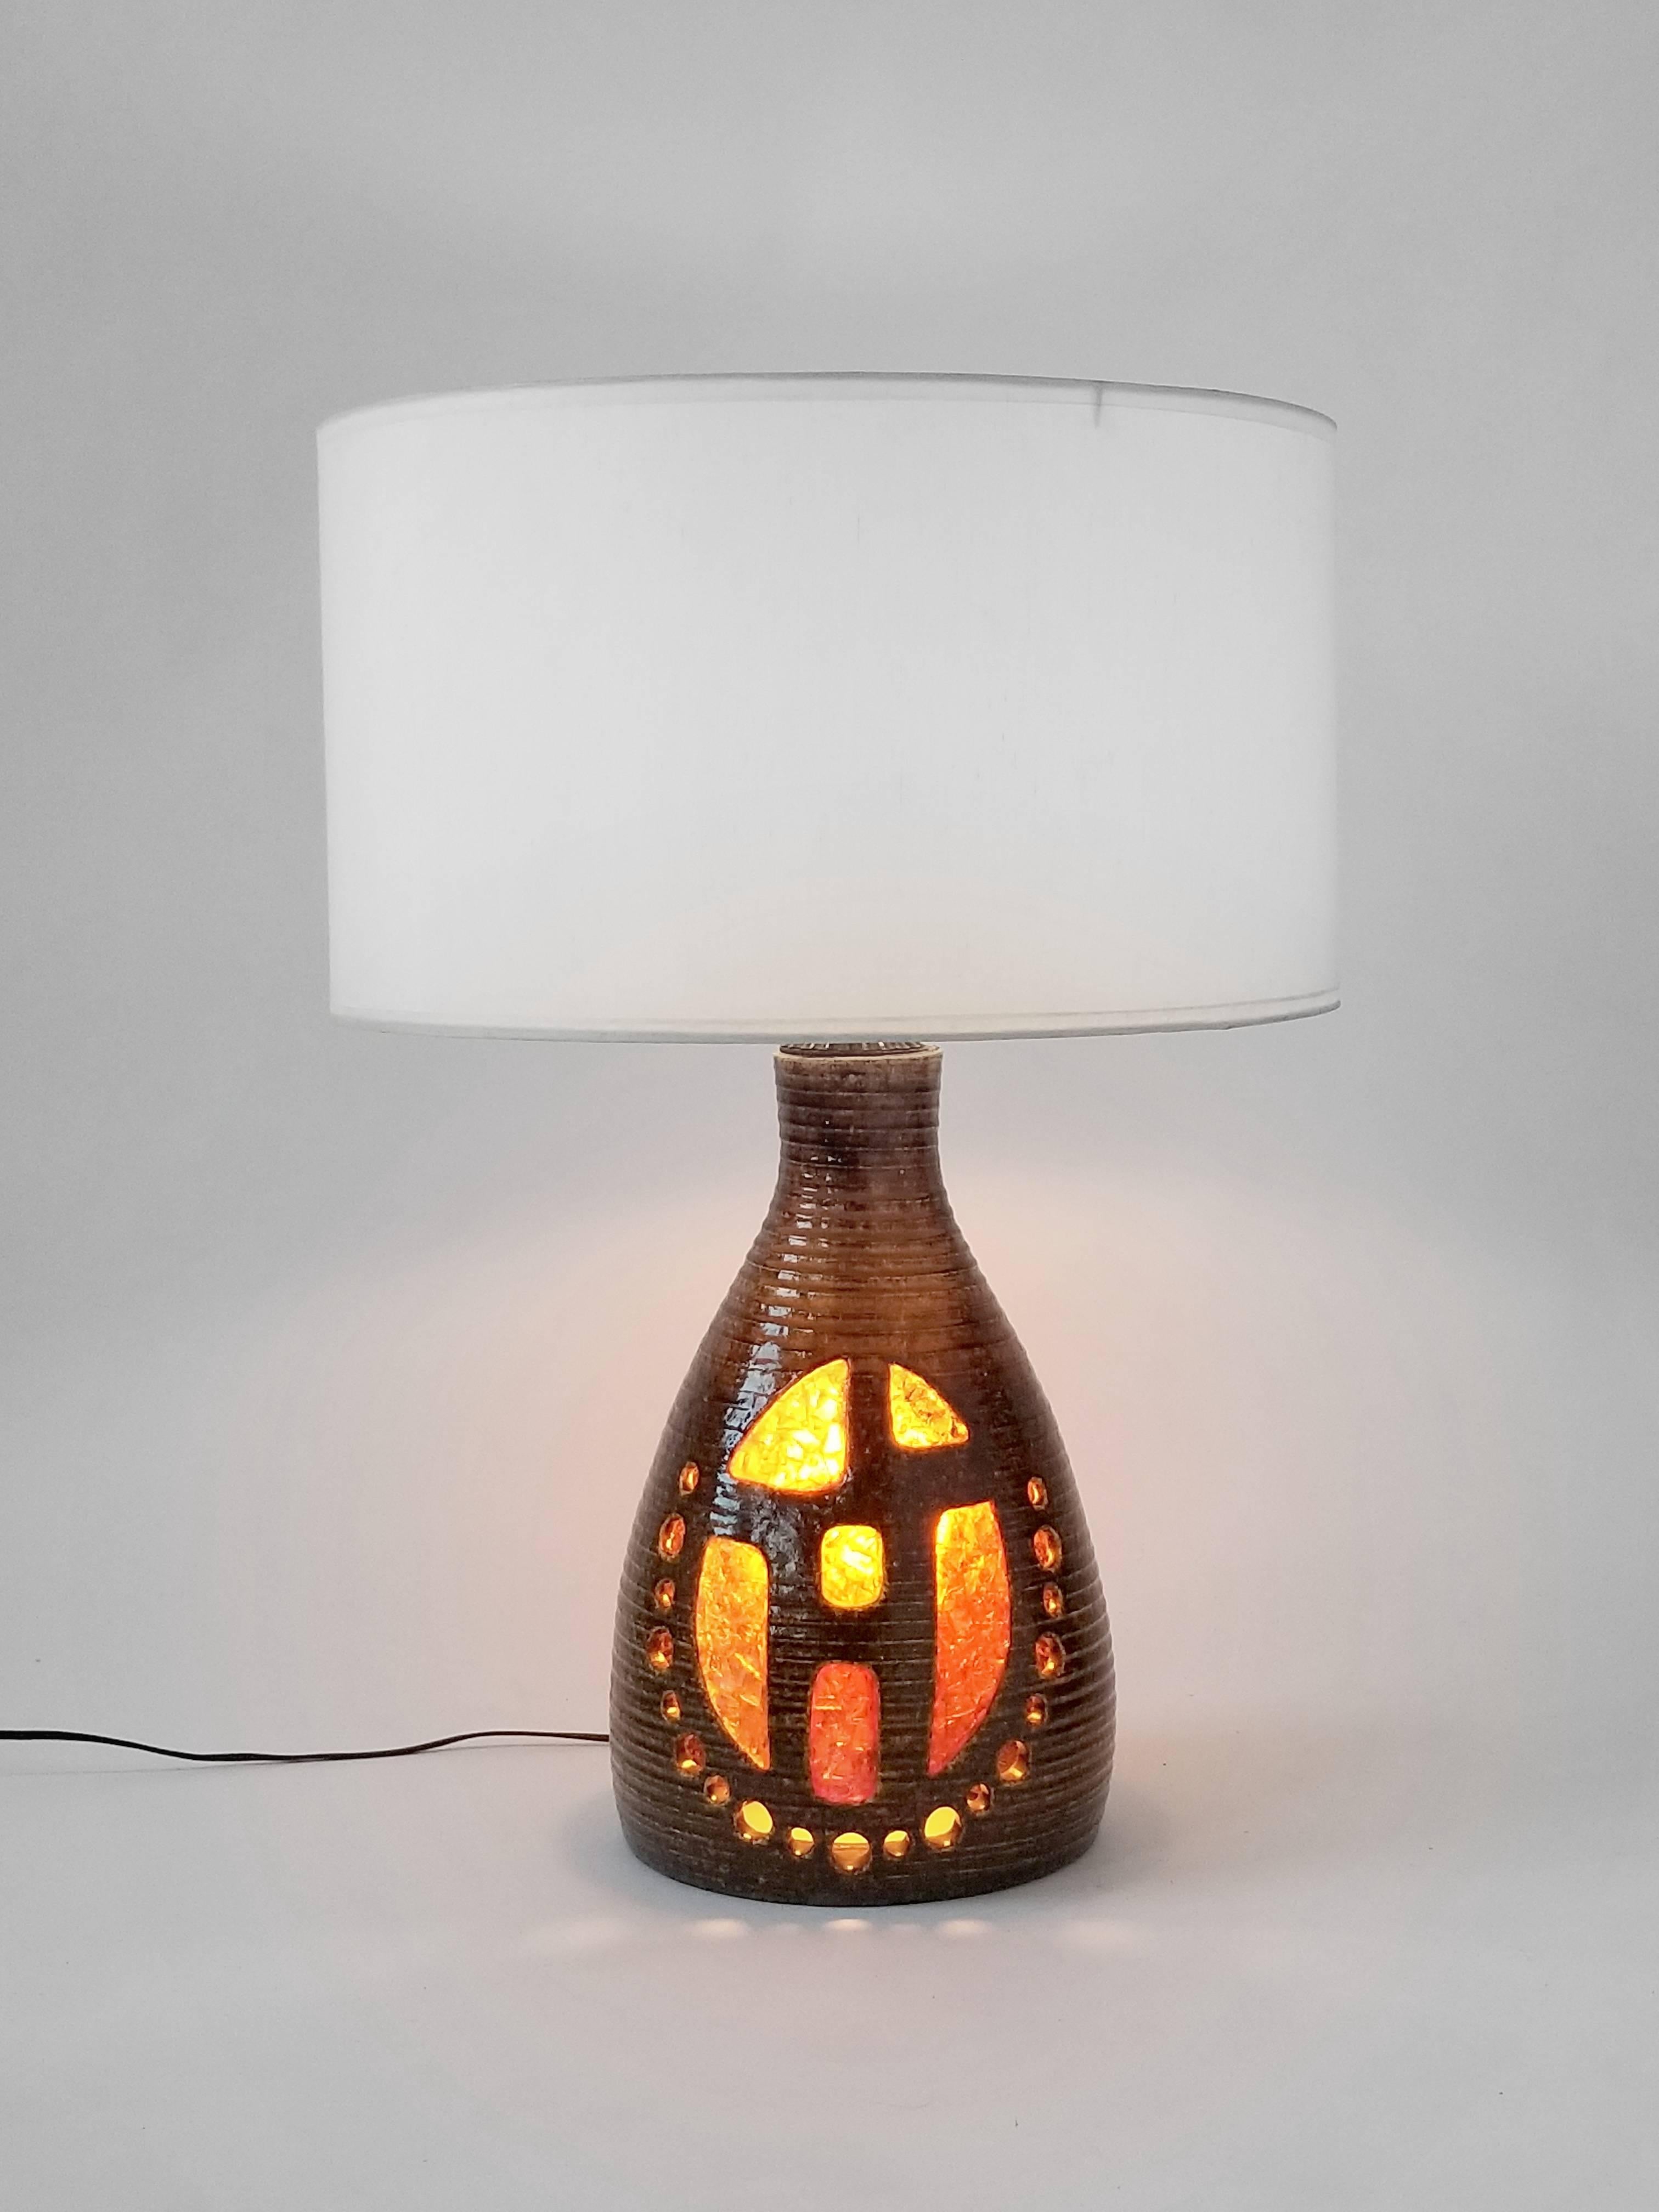 Rare Georges Pelletier table lamp with a warm colorful resin artwork .

Contain two E27 socket. One is located in the ceramic base.

Measure 26 inches to top finial. 

Switch on cord.

Regular North American 110 volt wall plug. 

Signed Accolay